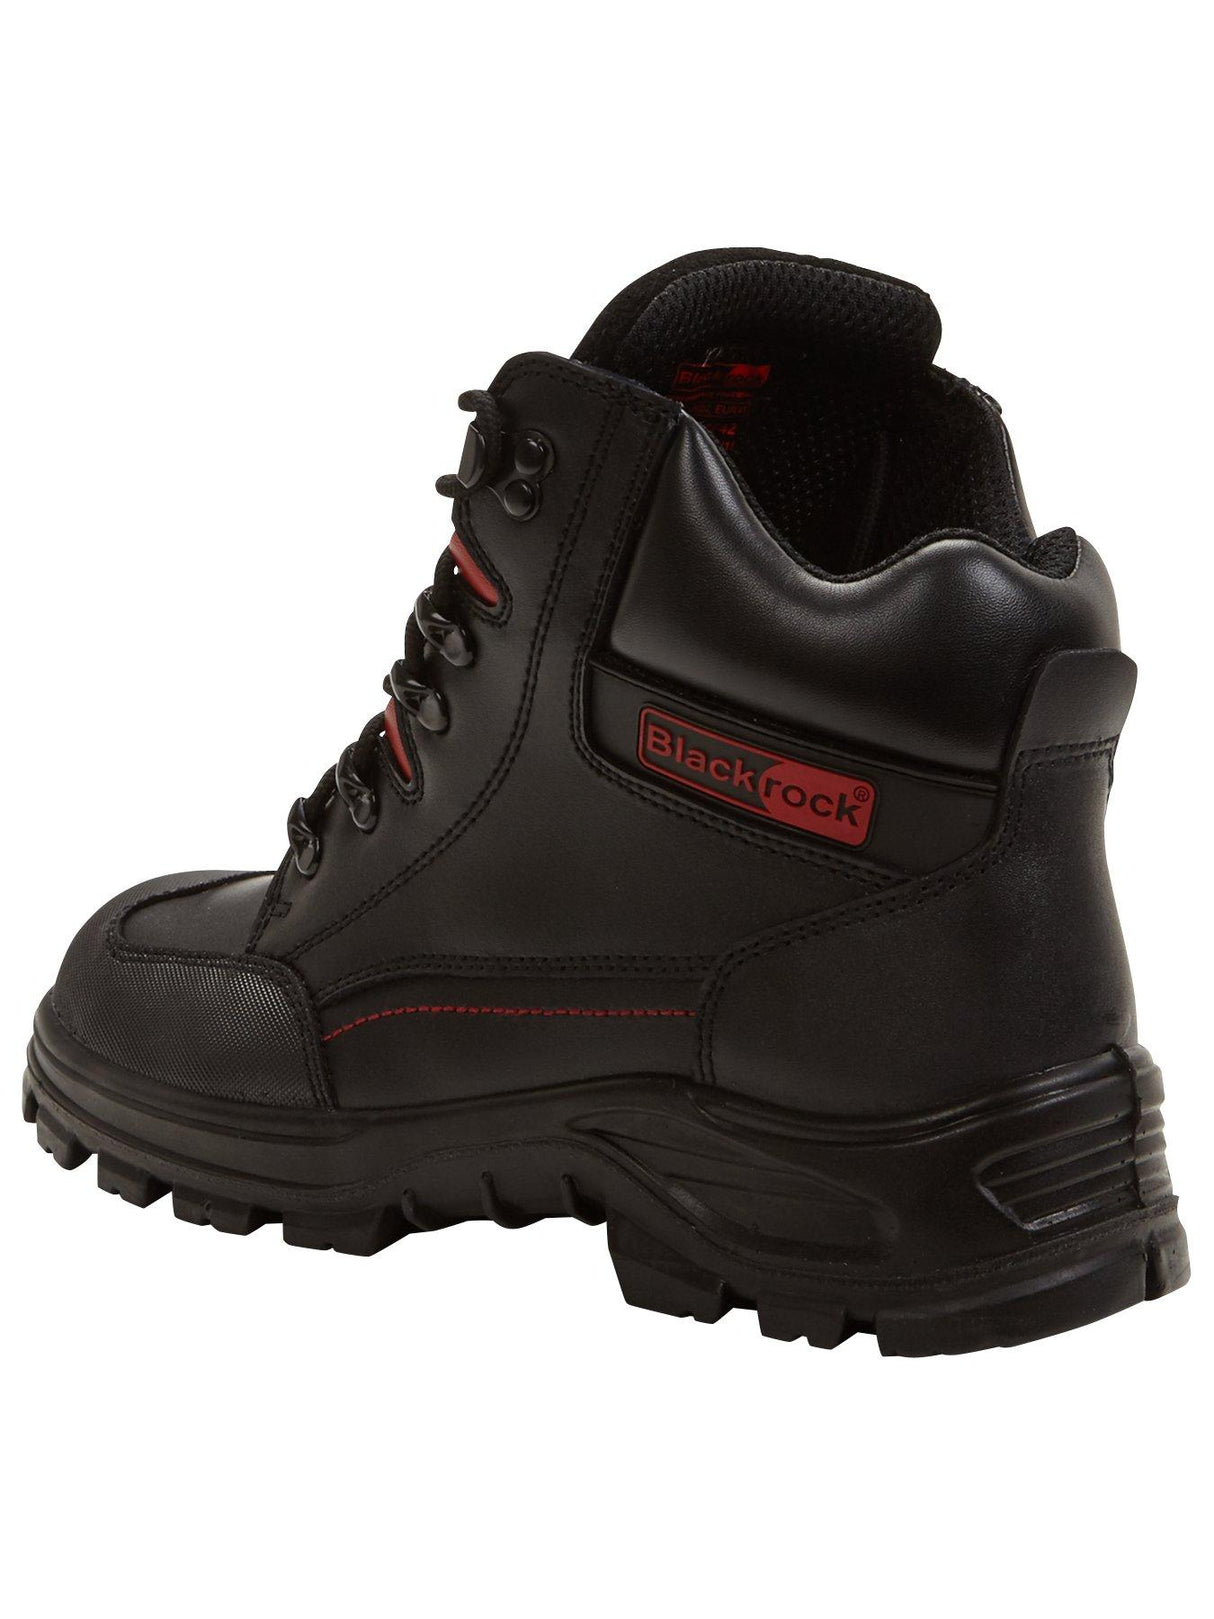 Blackrock SF42 Panther SB-P Water Resistant Leather Safety Boots UK 7-12 Black